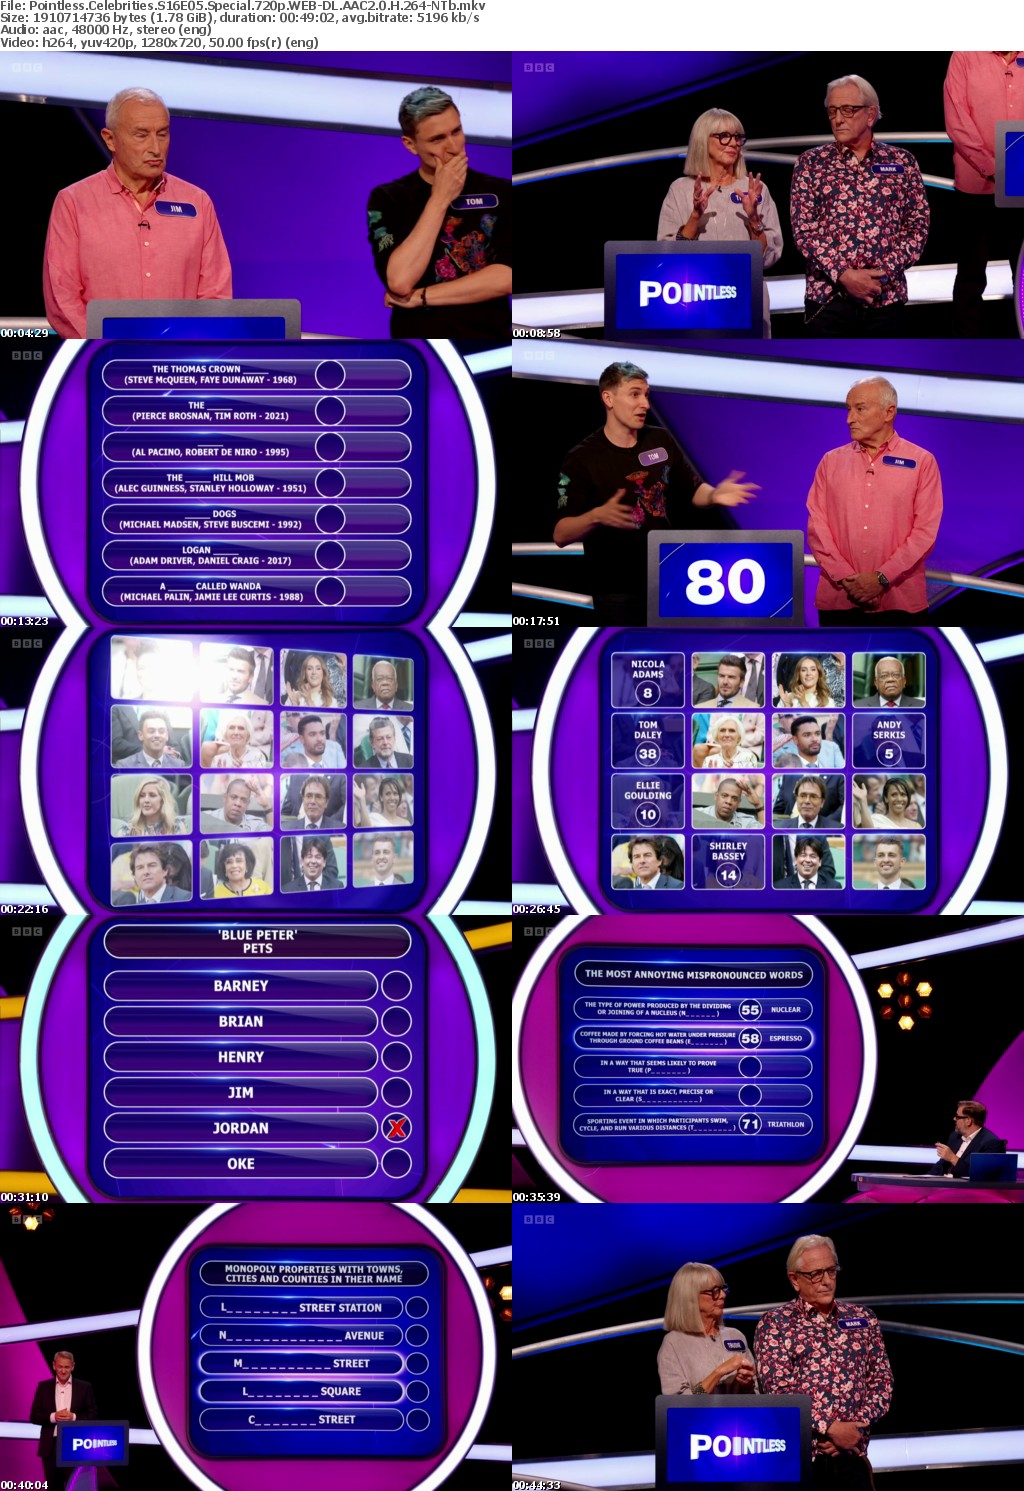 Pointless Celebrities S16E05 Special 720p WEB-DL AAC2 0 H 264-NTb